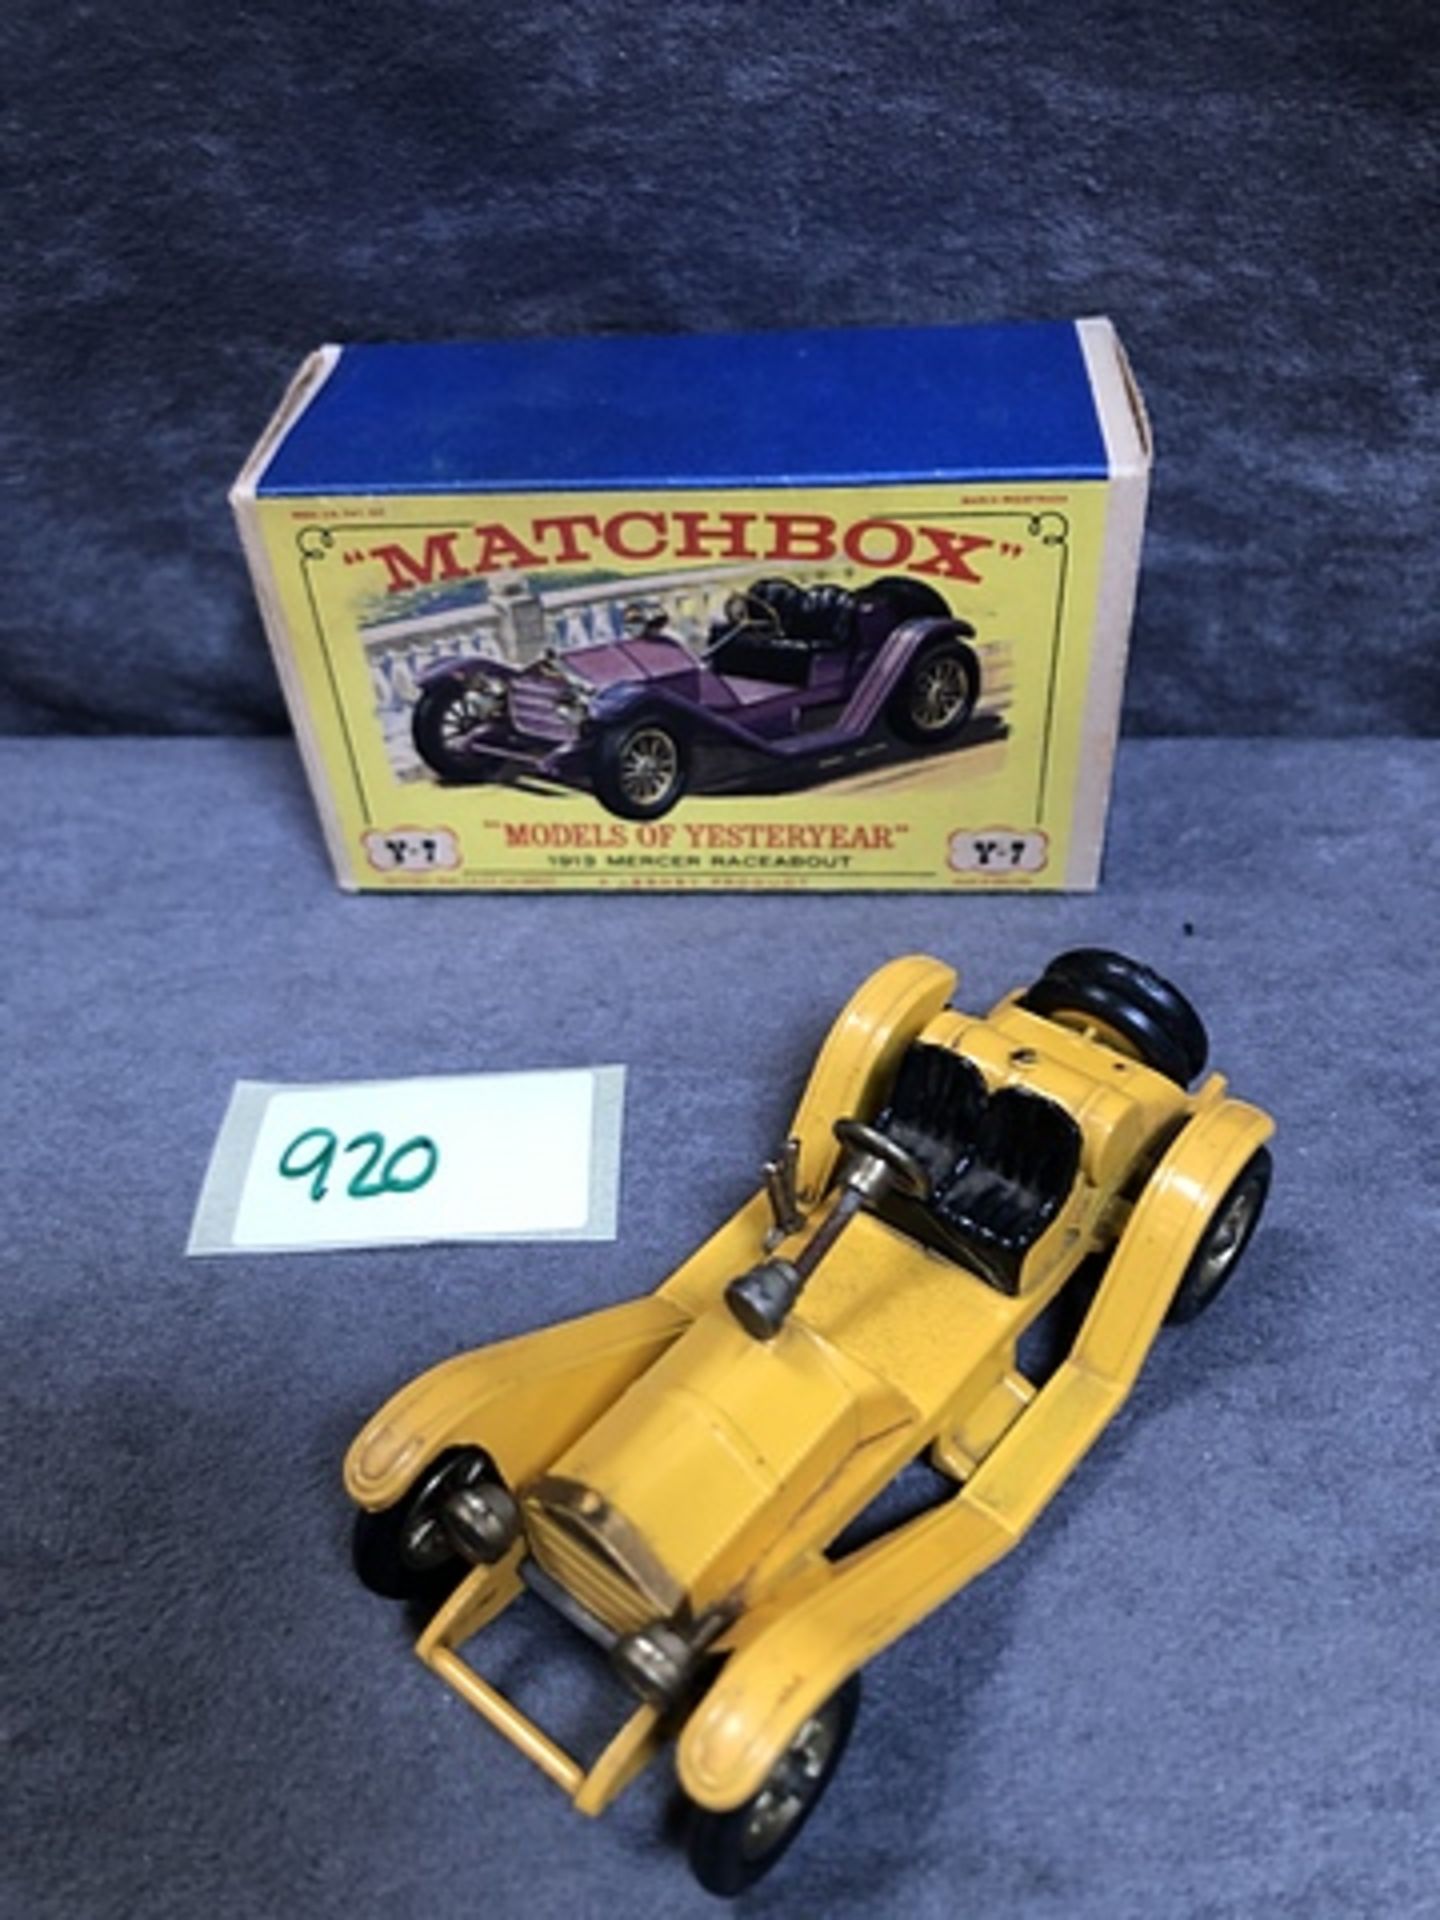 Matchbox Lesney Diecast # Y-7 1913 Mercer Race About Complete With Box - Image 2 of 2